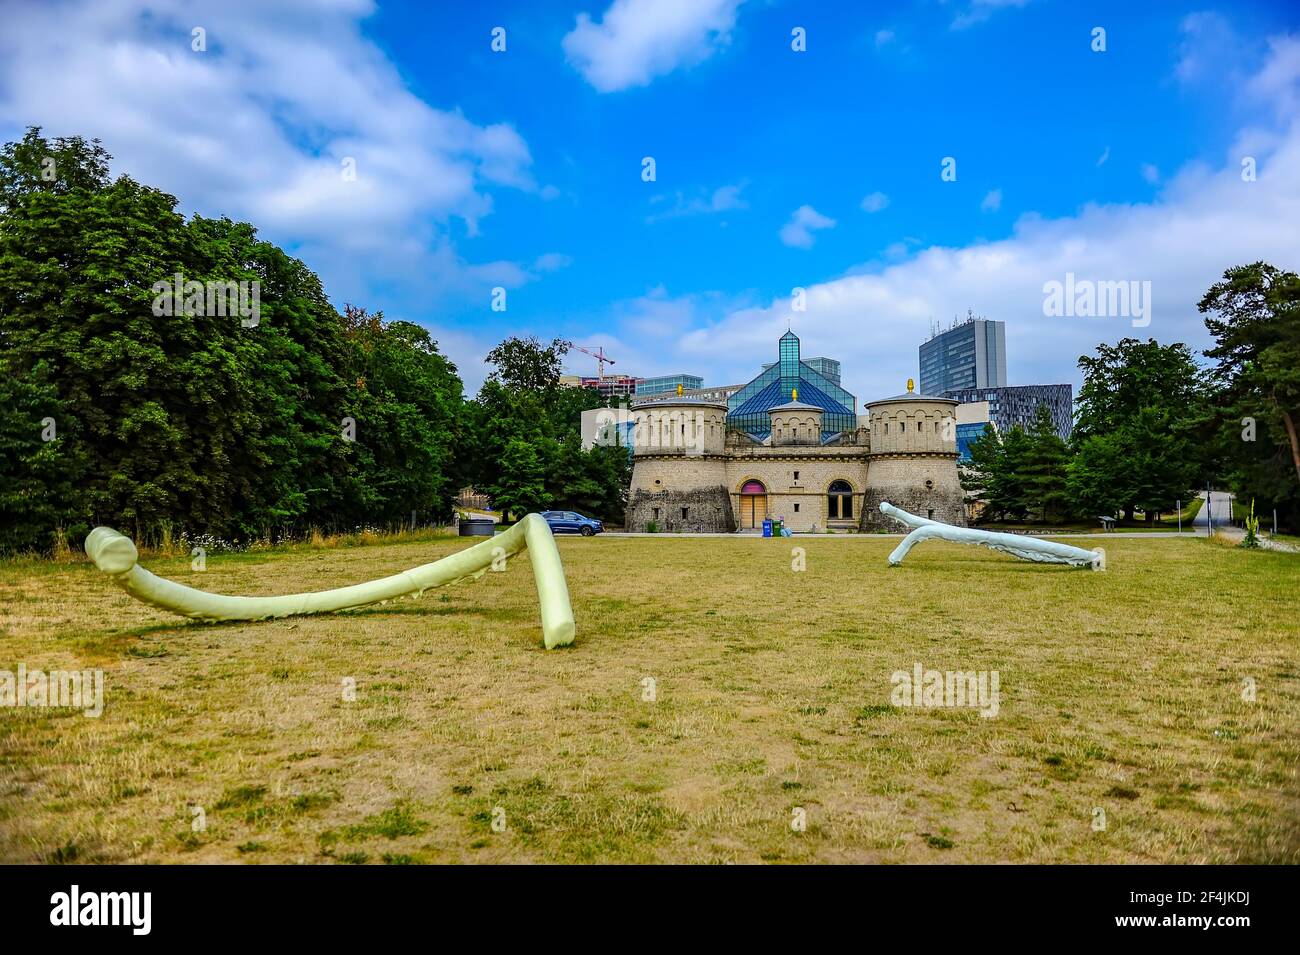 Luxembourg city, Luxembourg - July 15, 2019: Fort Thungen known as Three Acorns fortress and the MUDAM museum in Luxembourg city, Europe Stock Photo